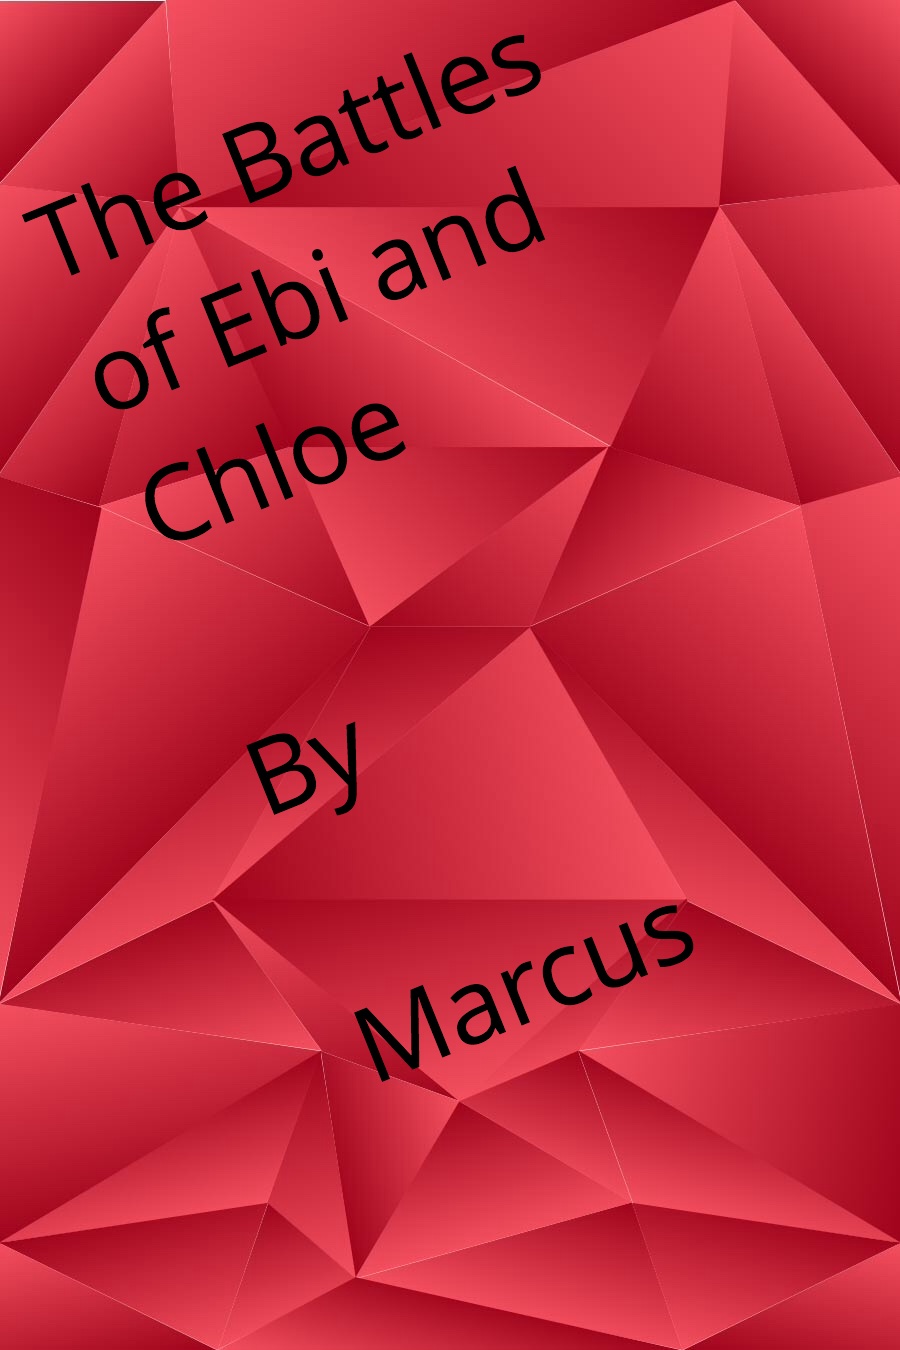 The Battles of Ebi and Chloe by Marcus S